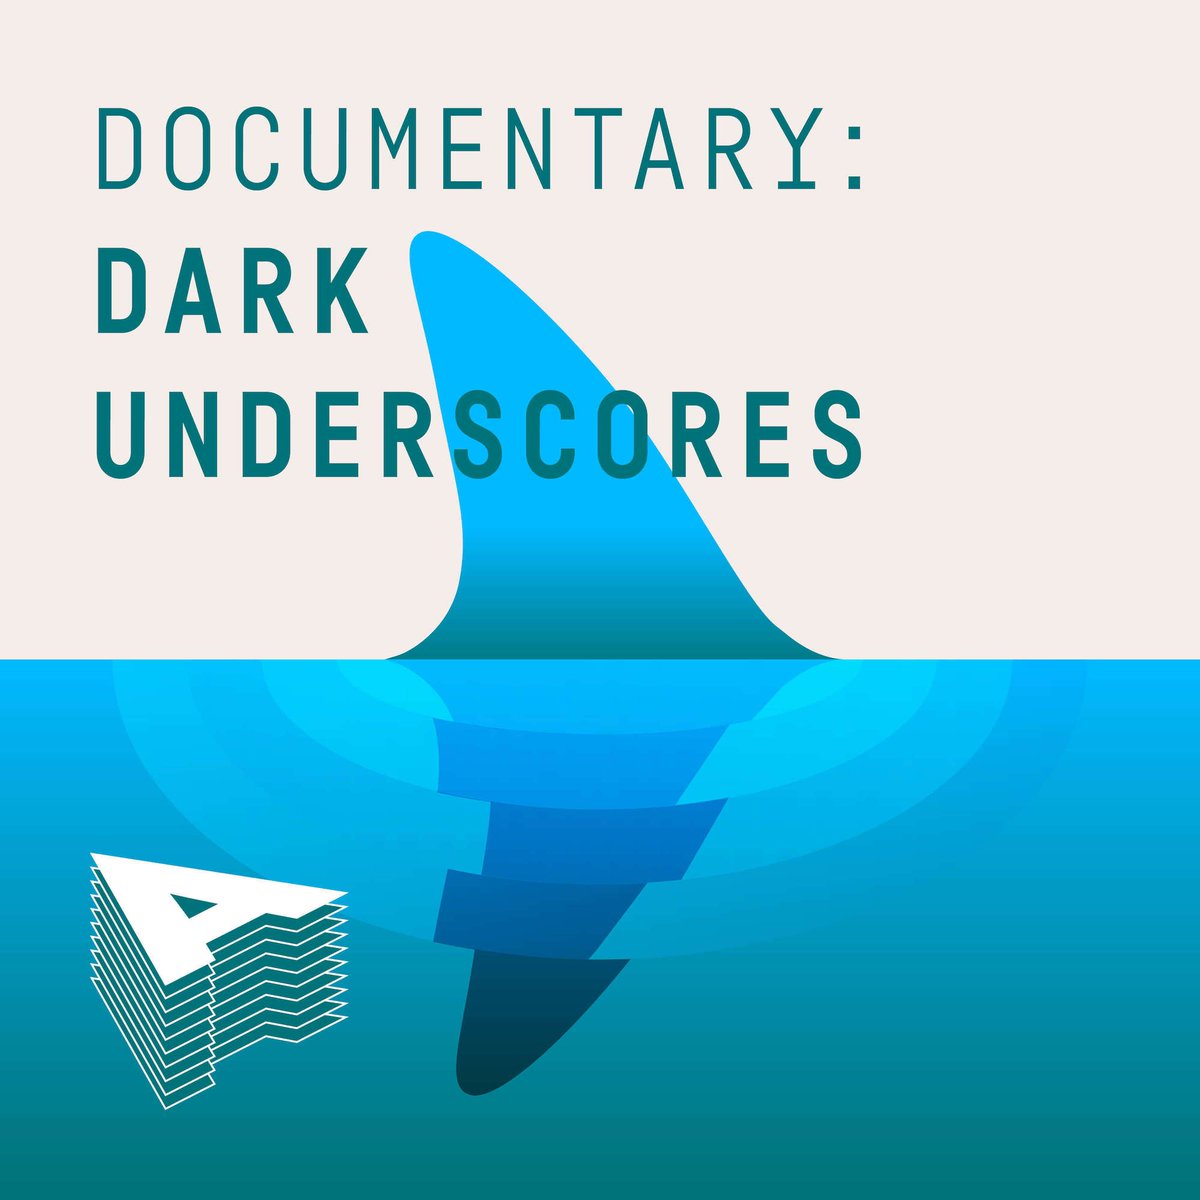 Very pleased to see that @BMGPM_UK have released the Dark Underscores album I co-composed. Fitting for this dark and dingy June afternoon! #librarymusic